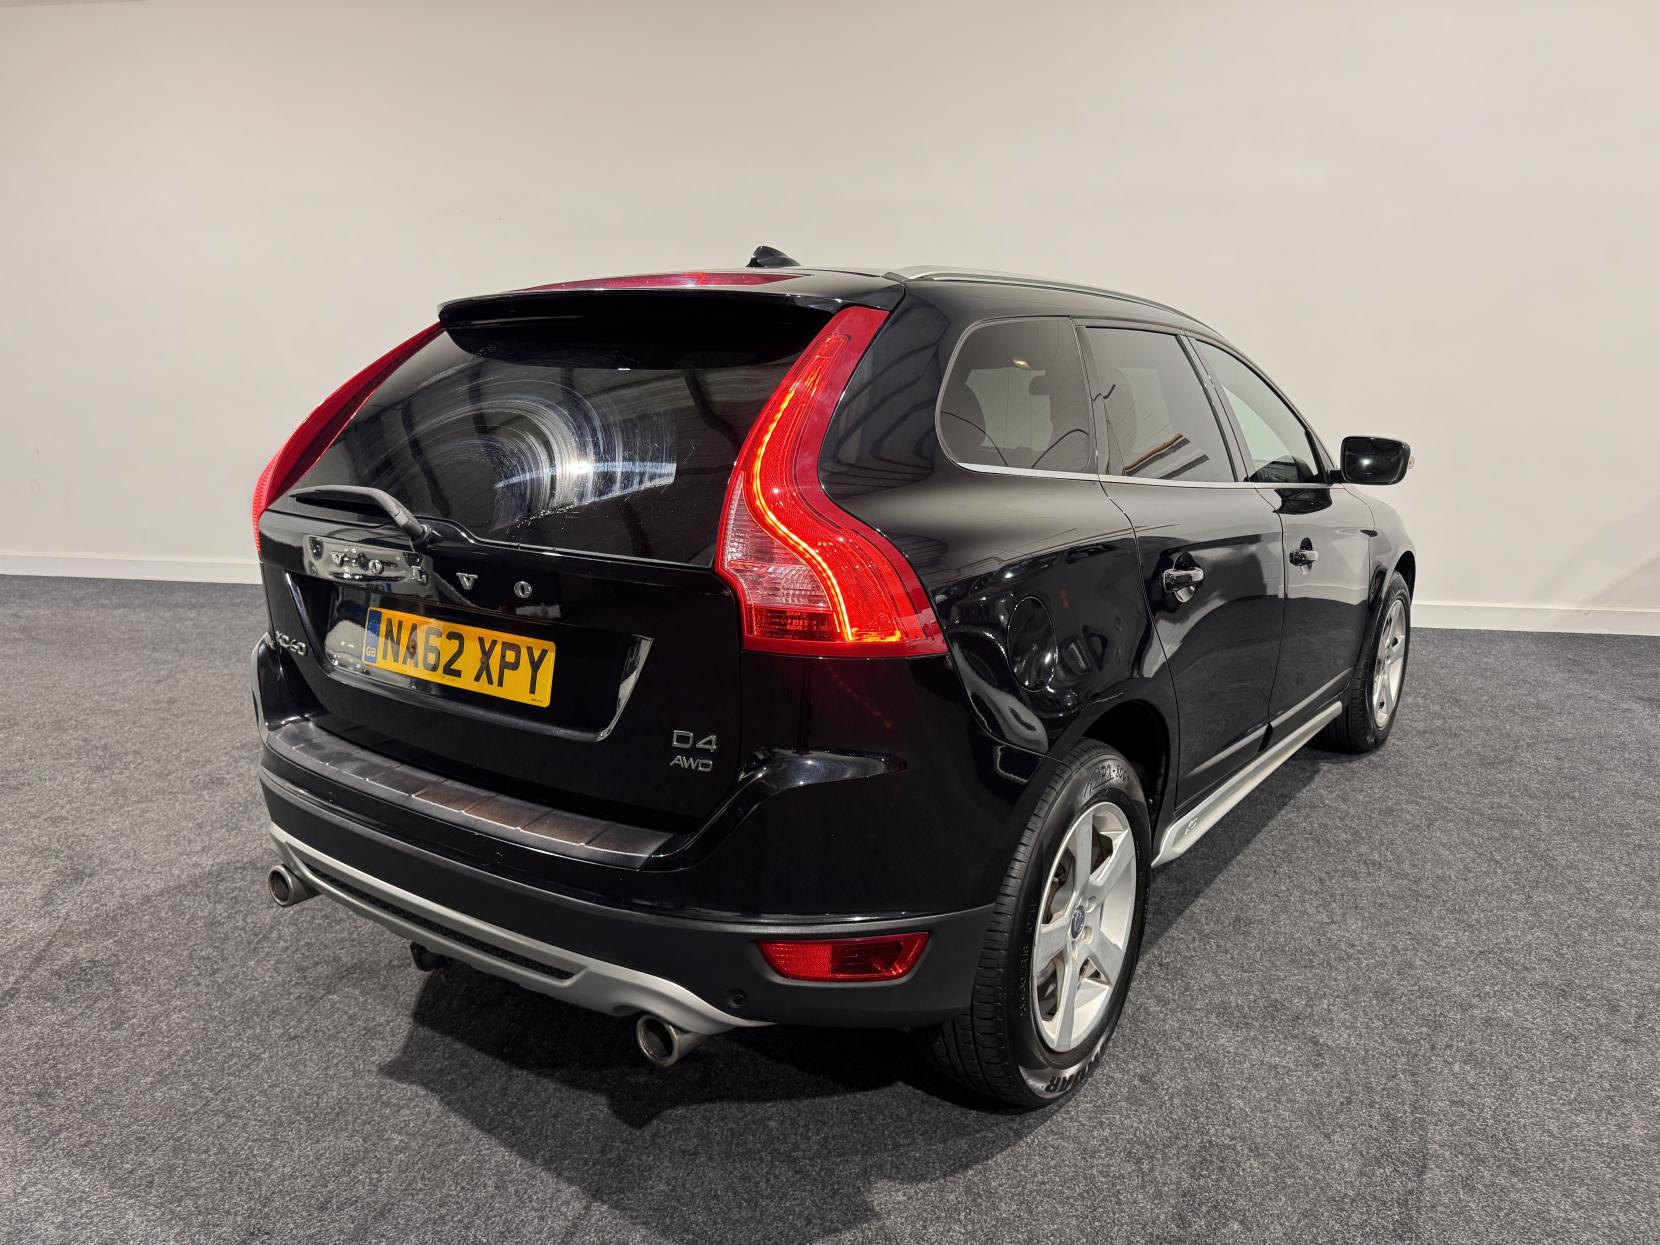 Volvo XC60 2.4 D4 R-Design Nav SUV 5dr Diesel Geartronic AWD Euro 5 (163 ps)